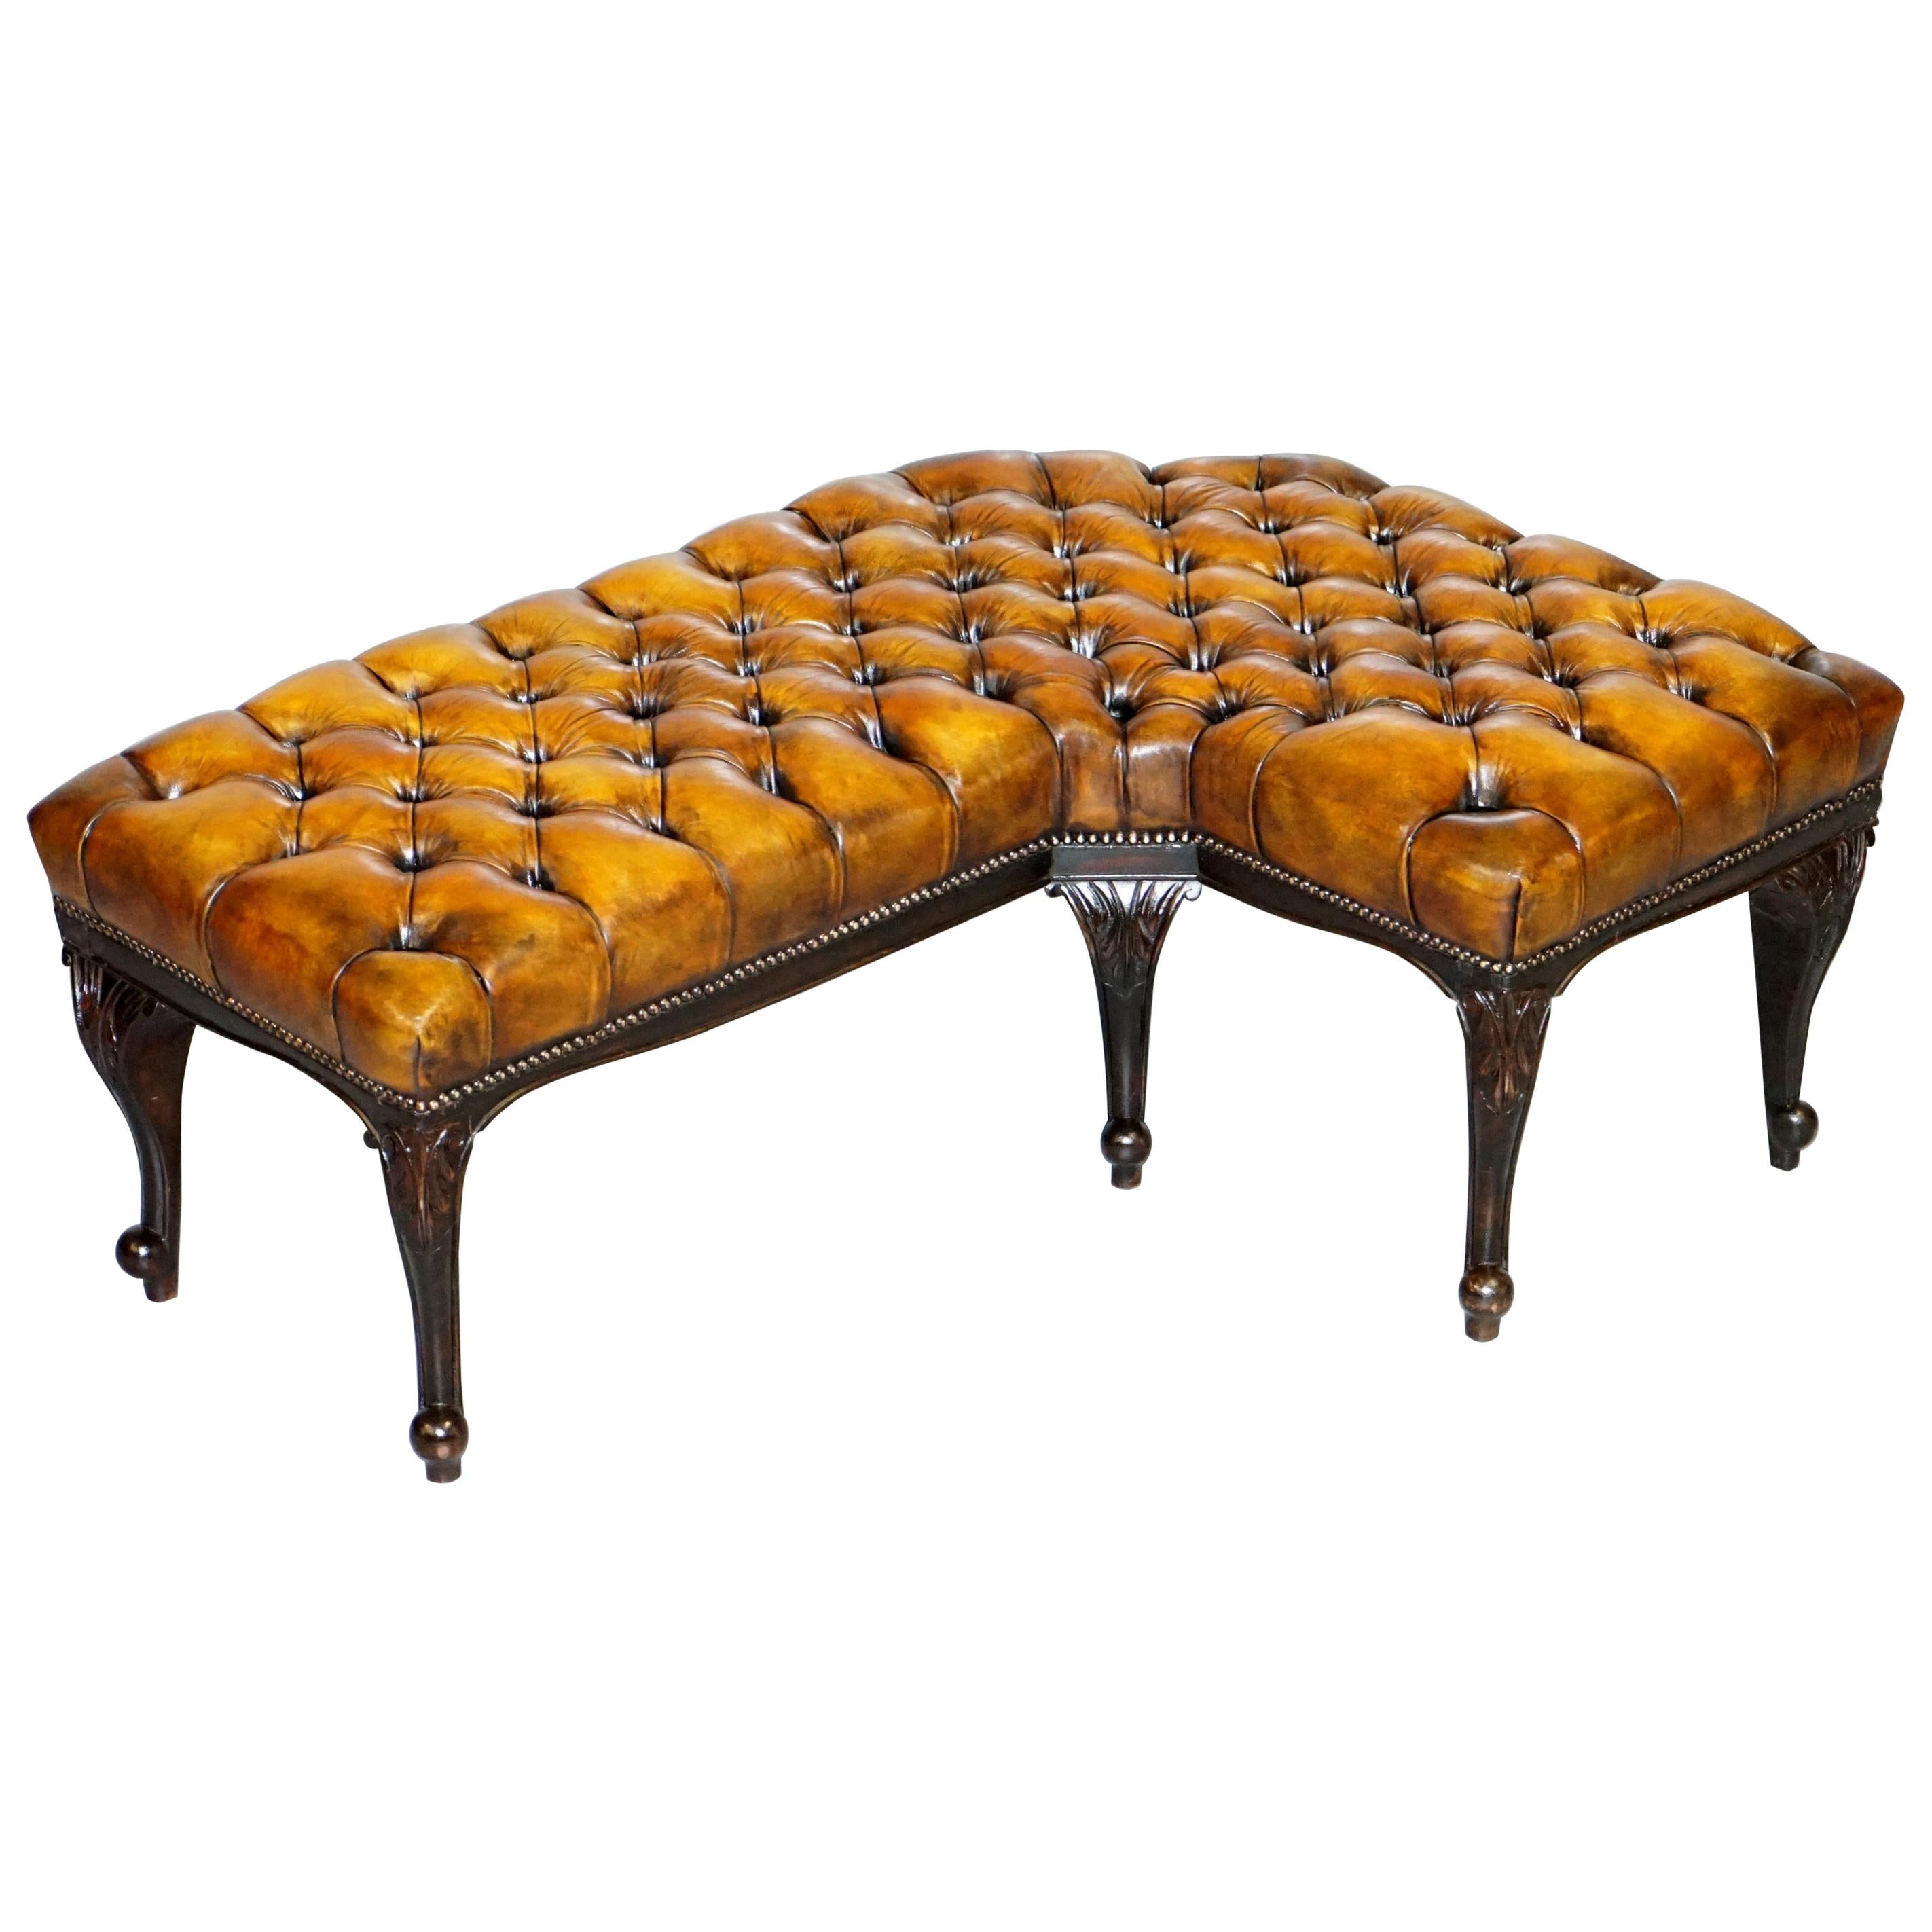 Fully Restored Victorian Chesterfield Brown Leather Corner Bench Stool Seat